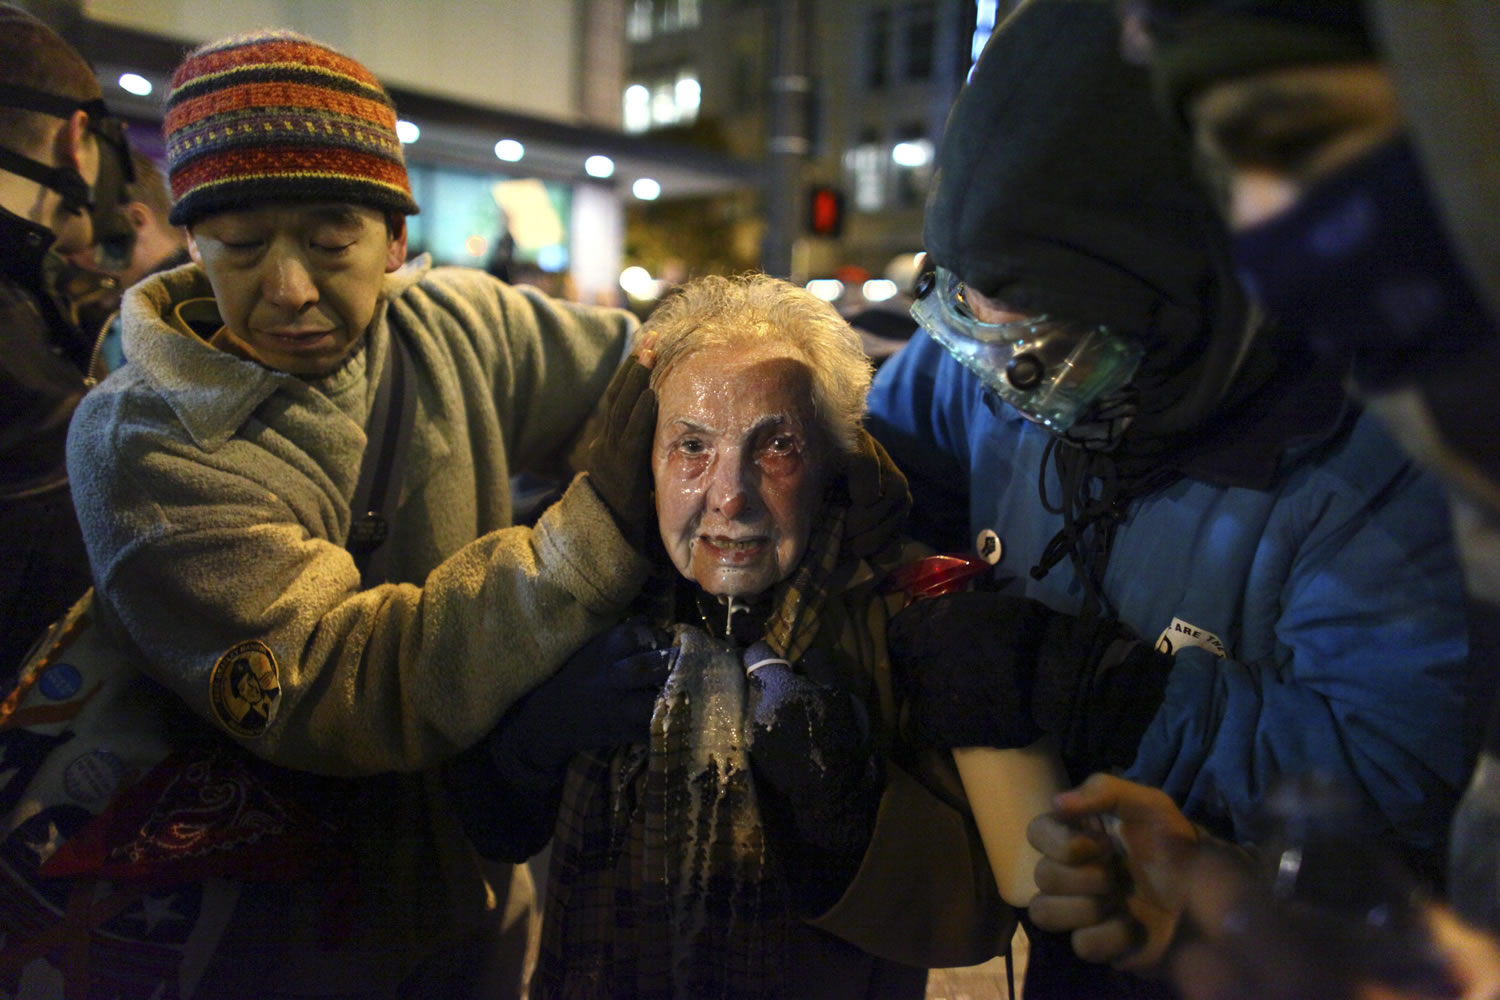 Seattle activist Dorli Rainey, 84, was hit with pepper spray during an Occupy Seattle protest on Nov.